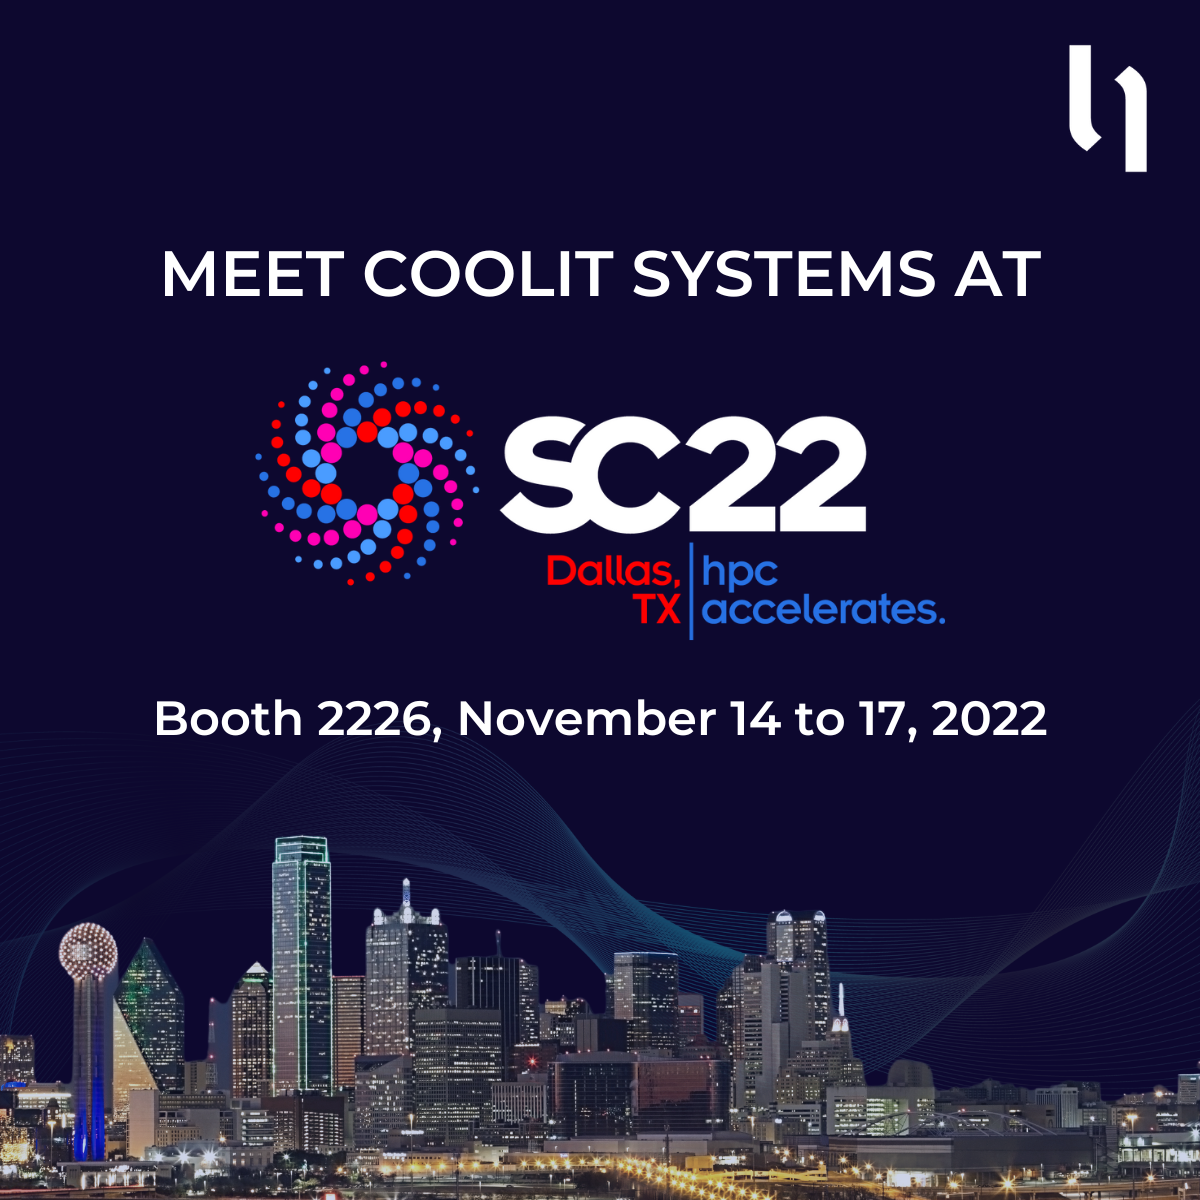 CoolIT Systems Shows Liquid Cooling Ready for Scale at SC22 in Dallas, Texas